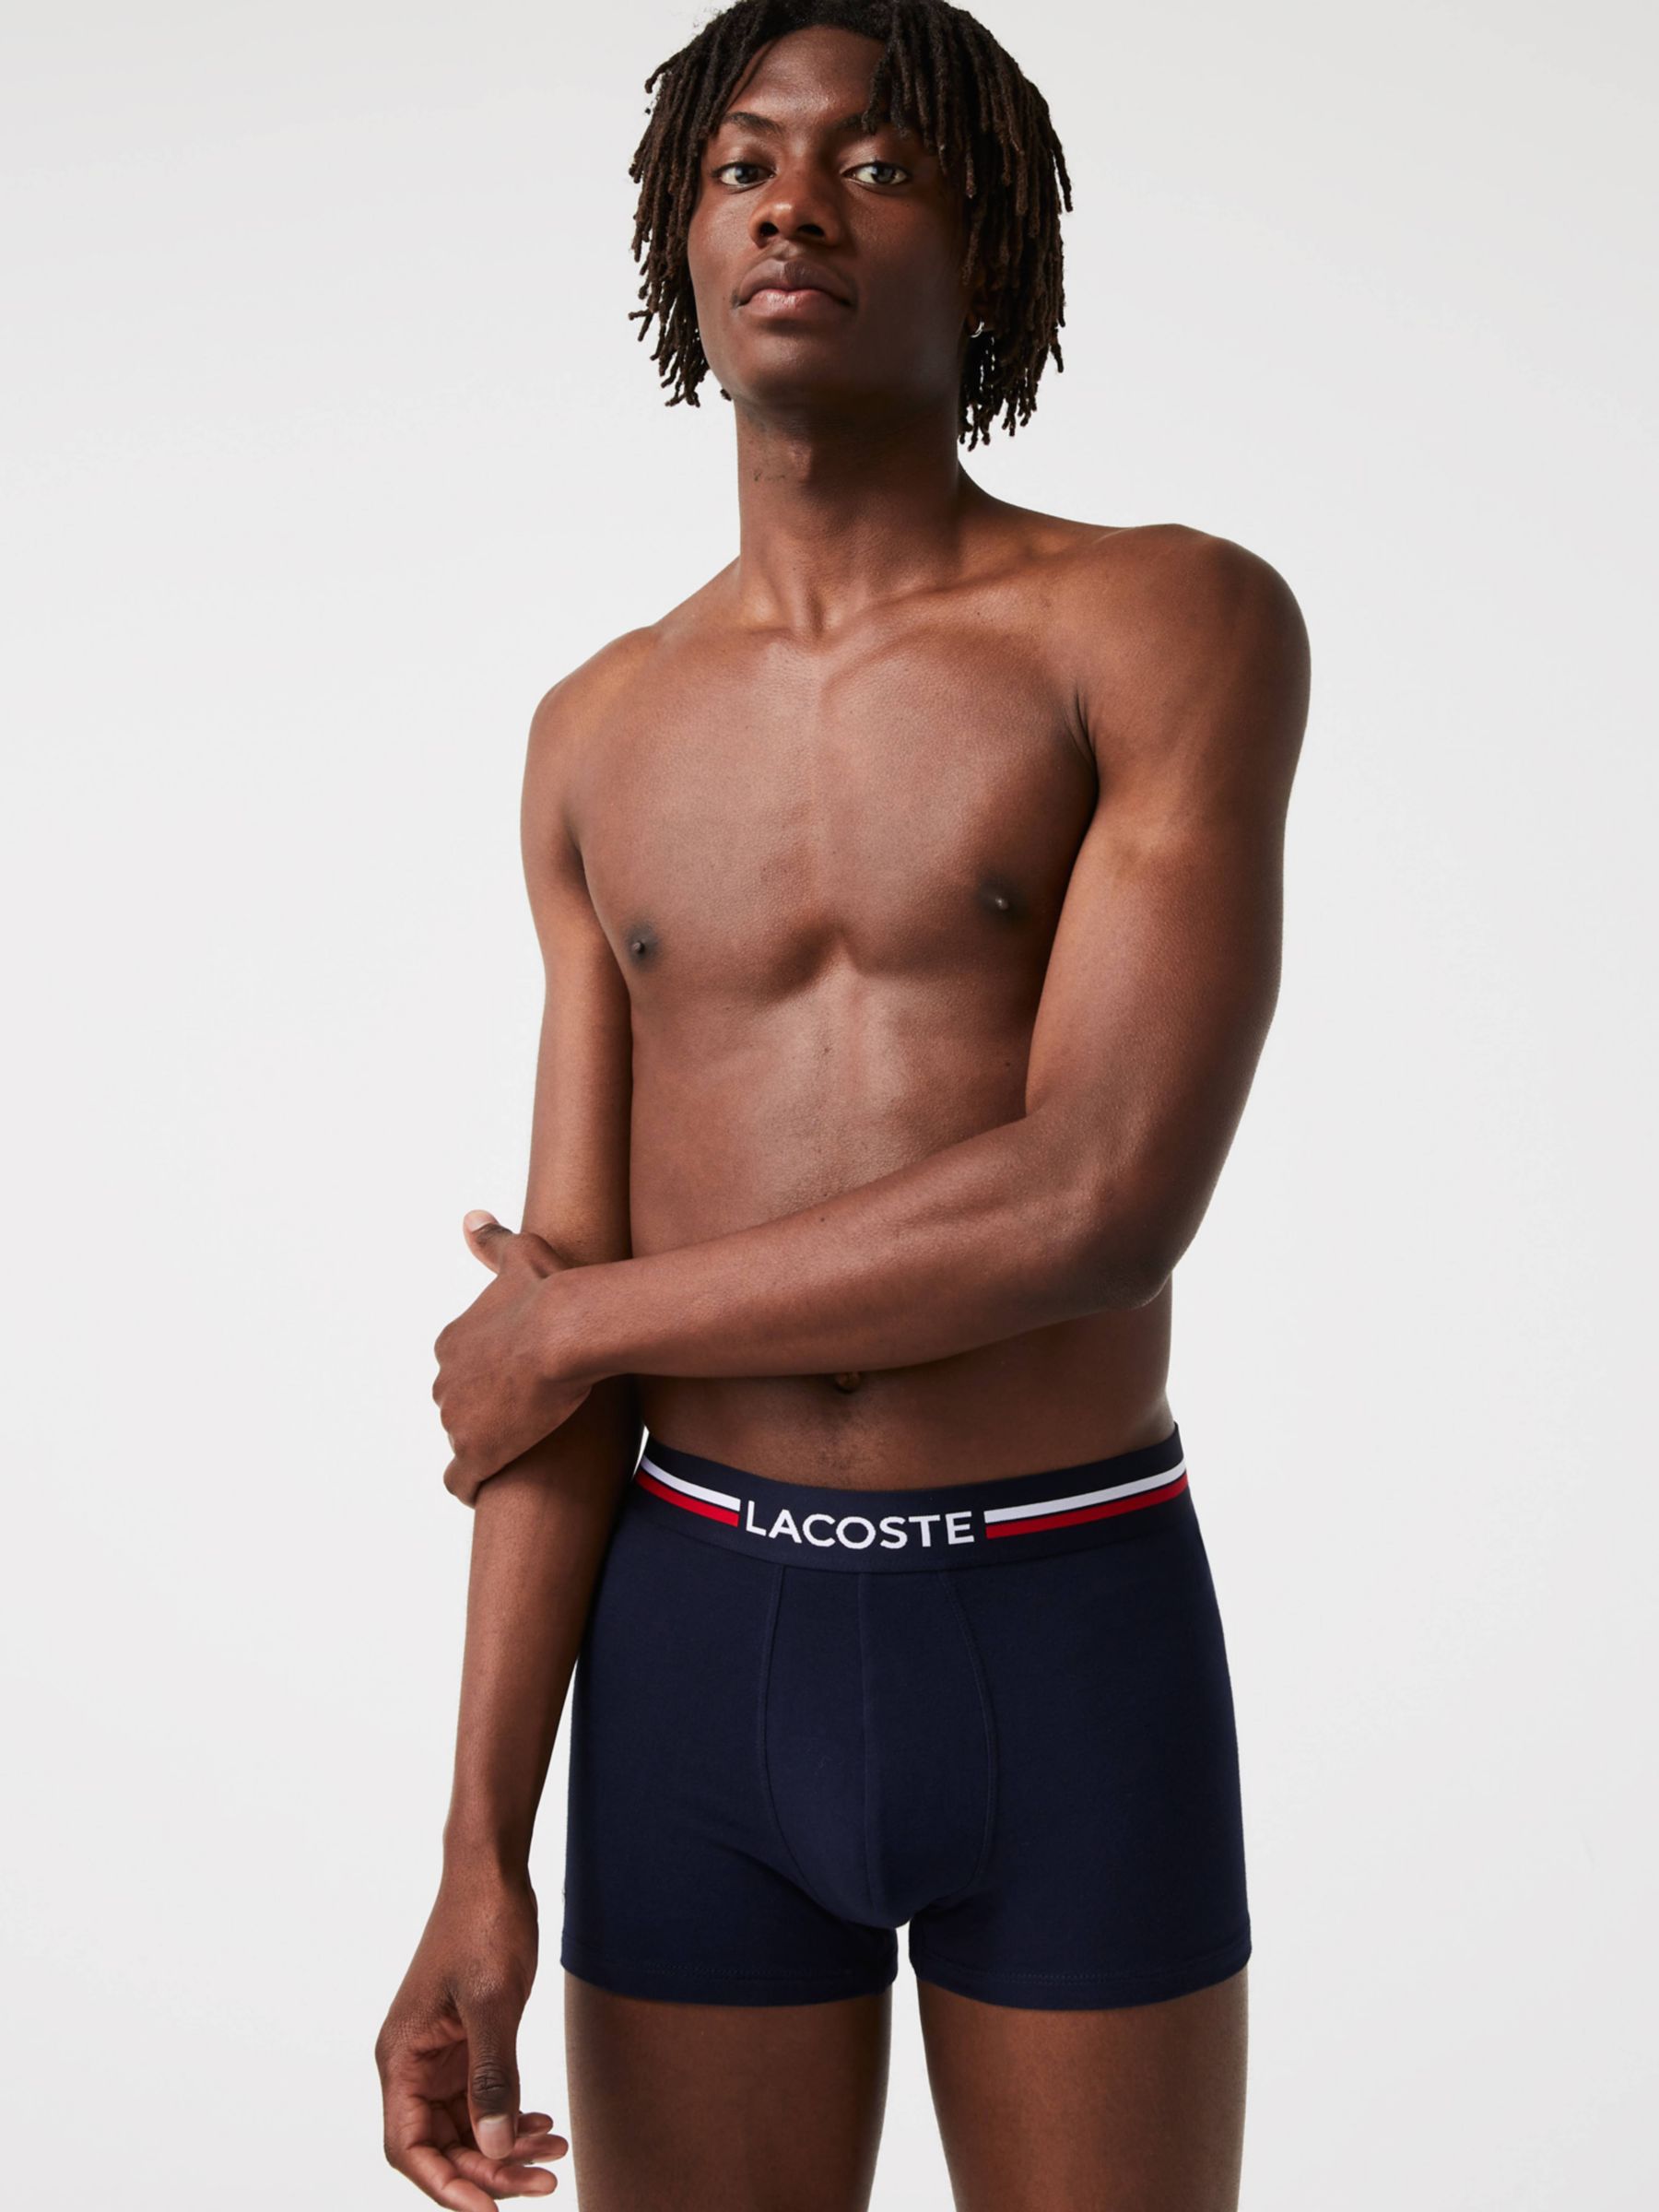 Lacoste Three Tone Waistband Iconic Trunks, Pack of 3, Navy Blue